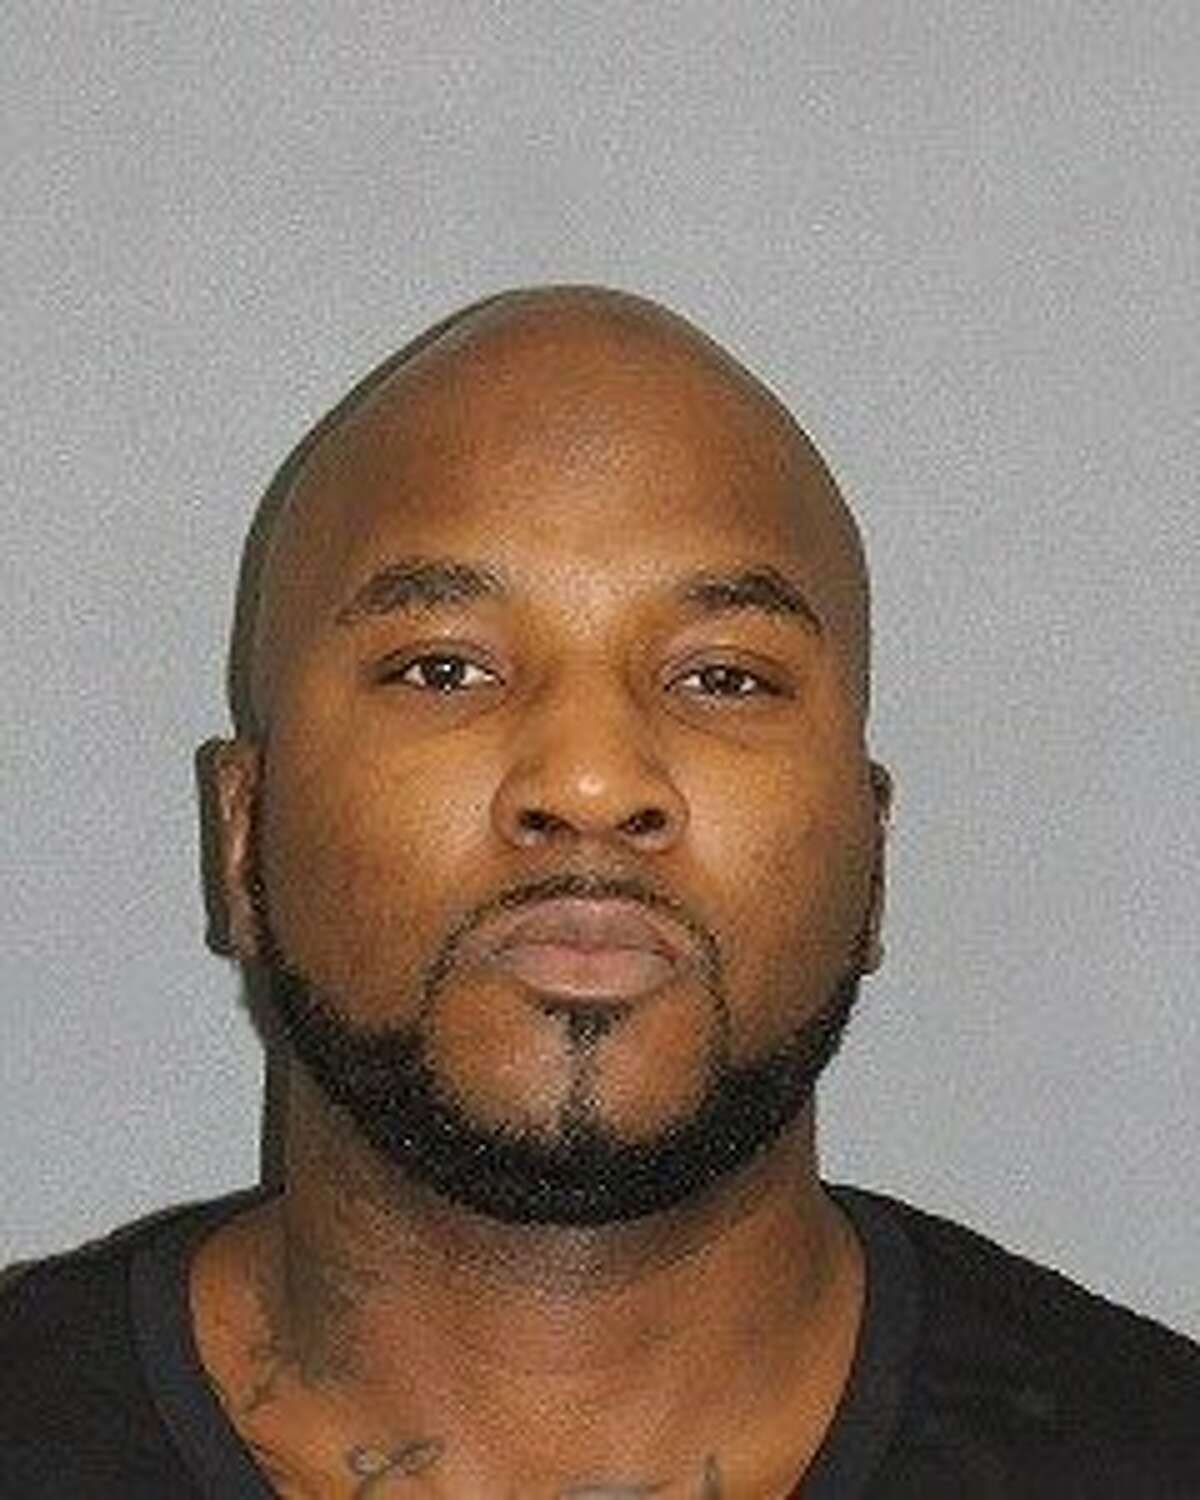 Rapper Jay “Young Jeezy” Jenkins was arrested on weapons charges along with five other suspects following the shooting death of a man at the Wiz Khalifa concert at the Shoreline Amphitheater Friday.